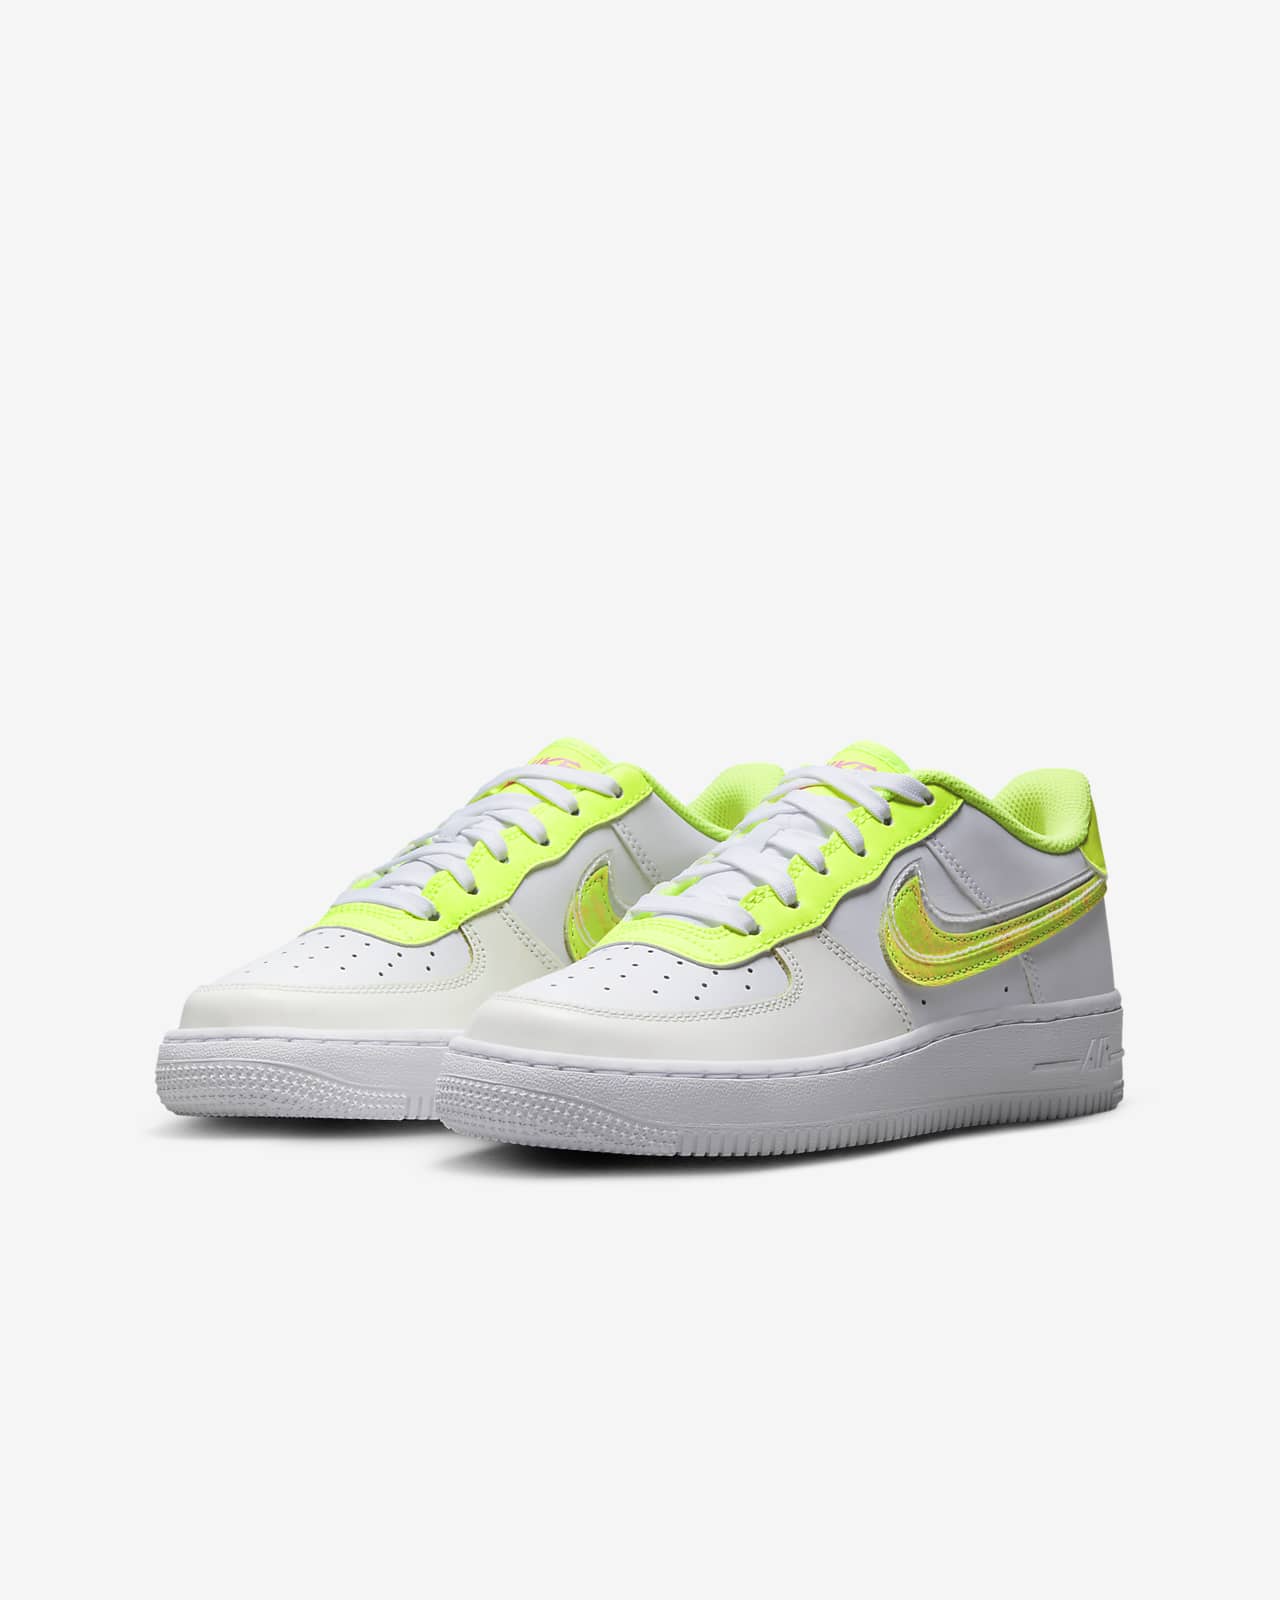 Air Force 1 LV 8 Leather Sneakers in White - Nike Kids